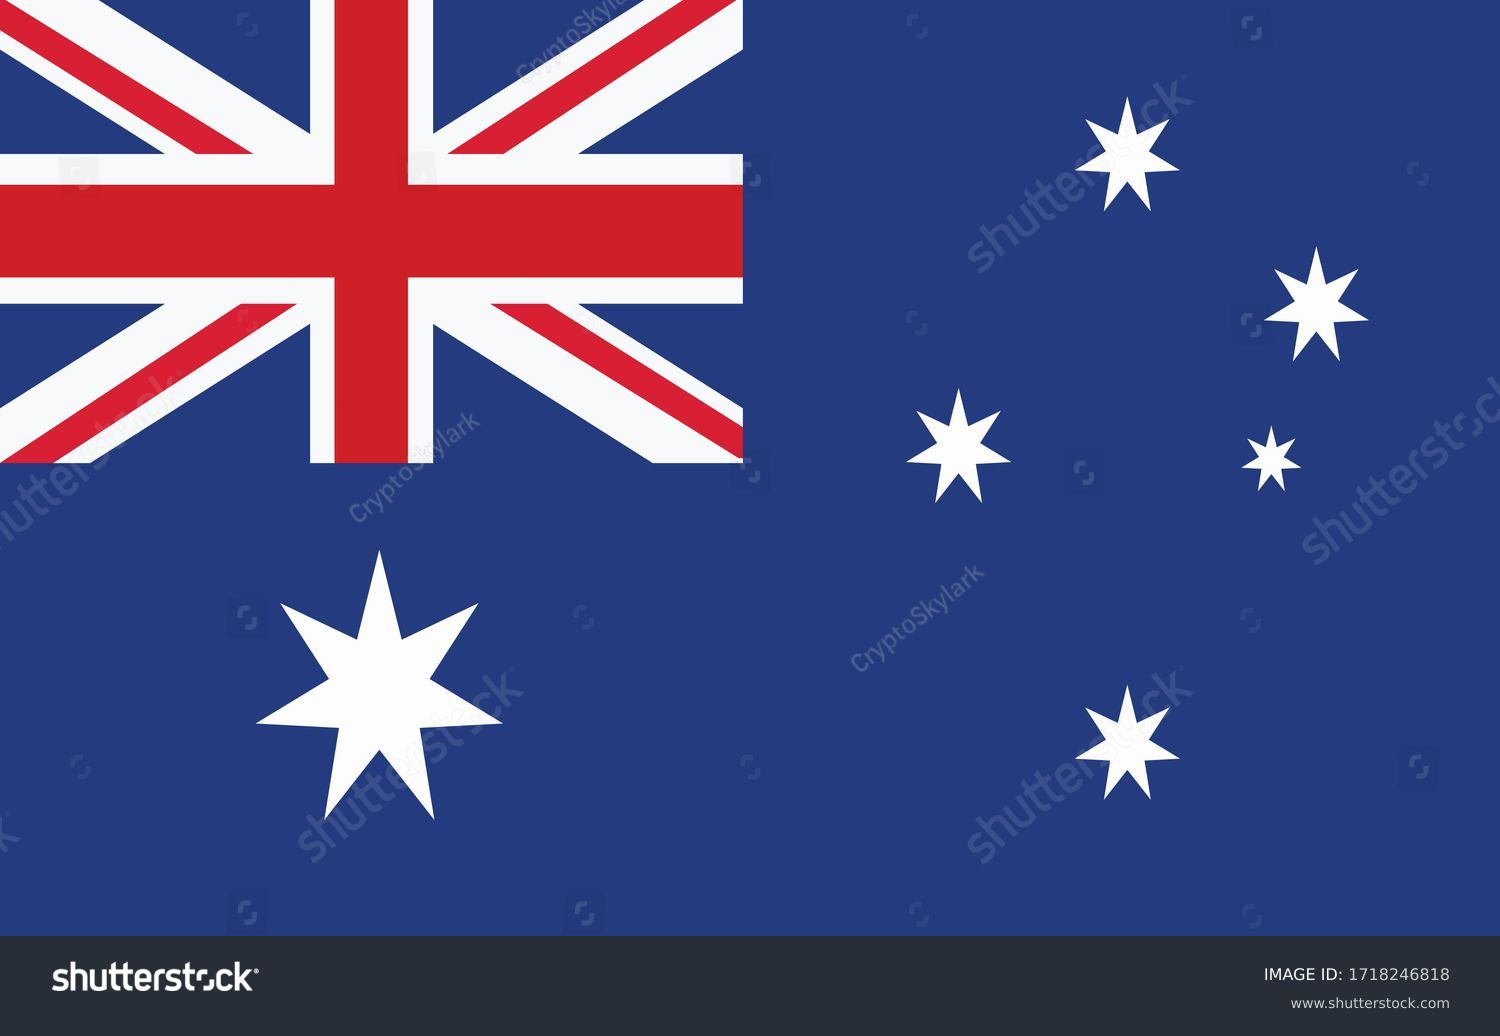 Australia flag vector graphic. Rectangle Australian flag illustration. Australia country flag is a symbol of freedom, patriotism and independence. #1718246818